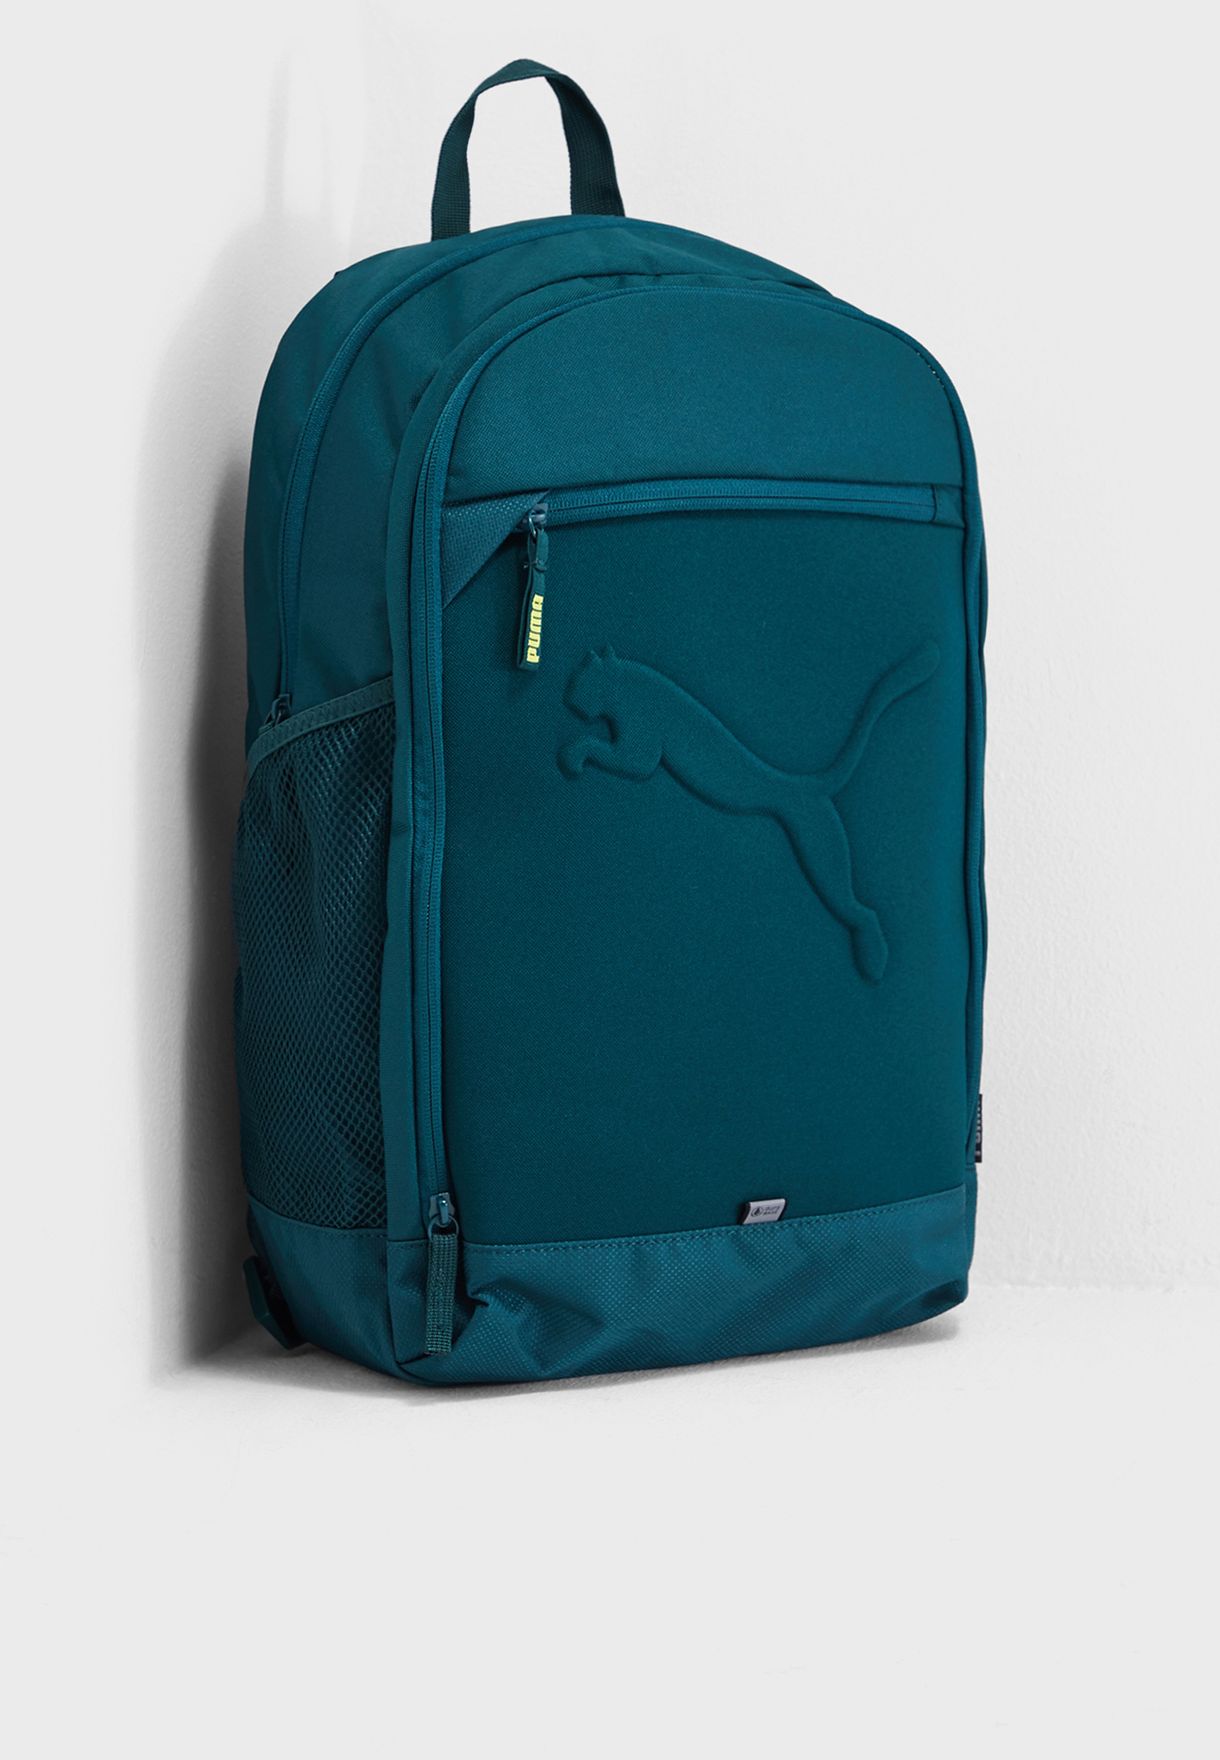 puma bags new collection